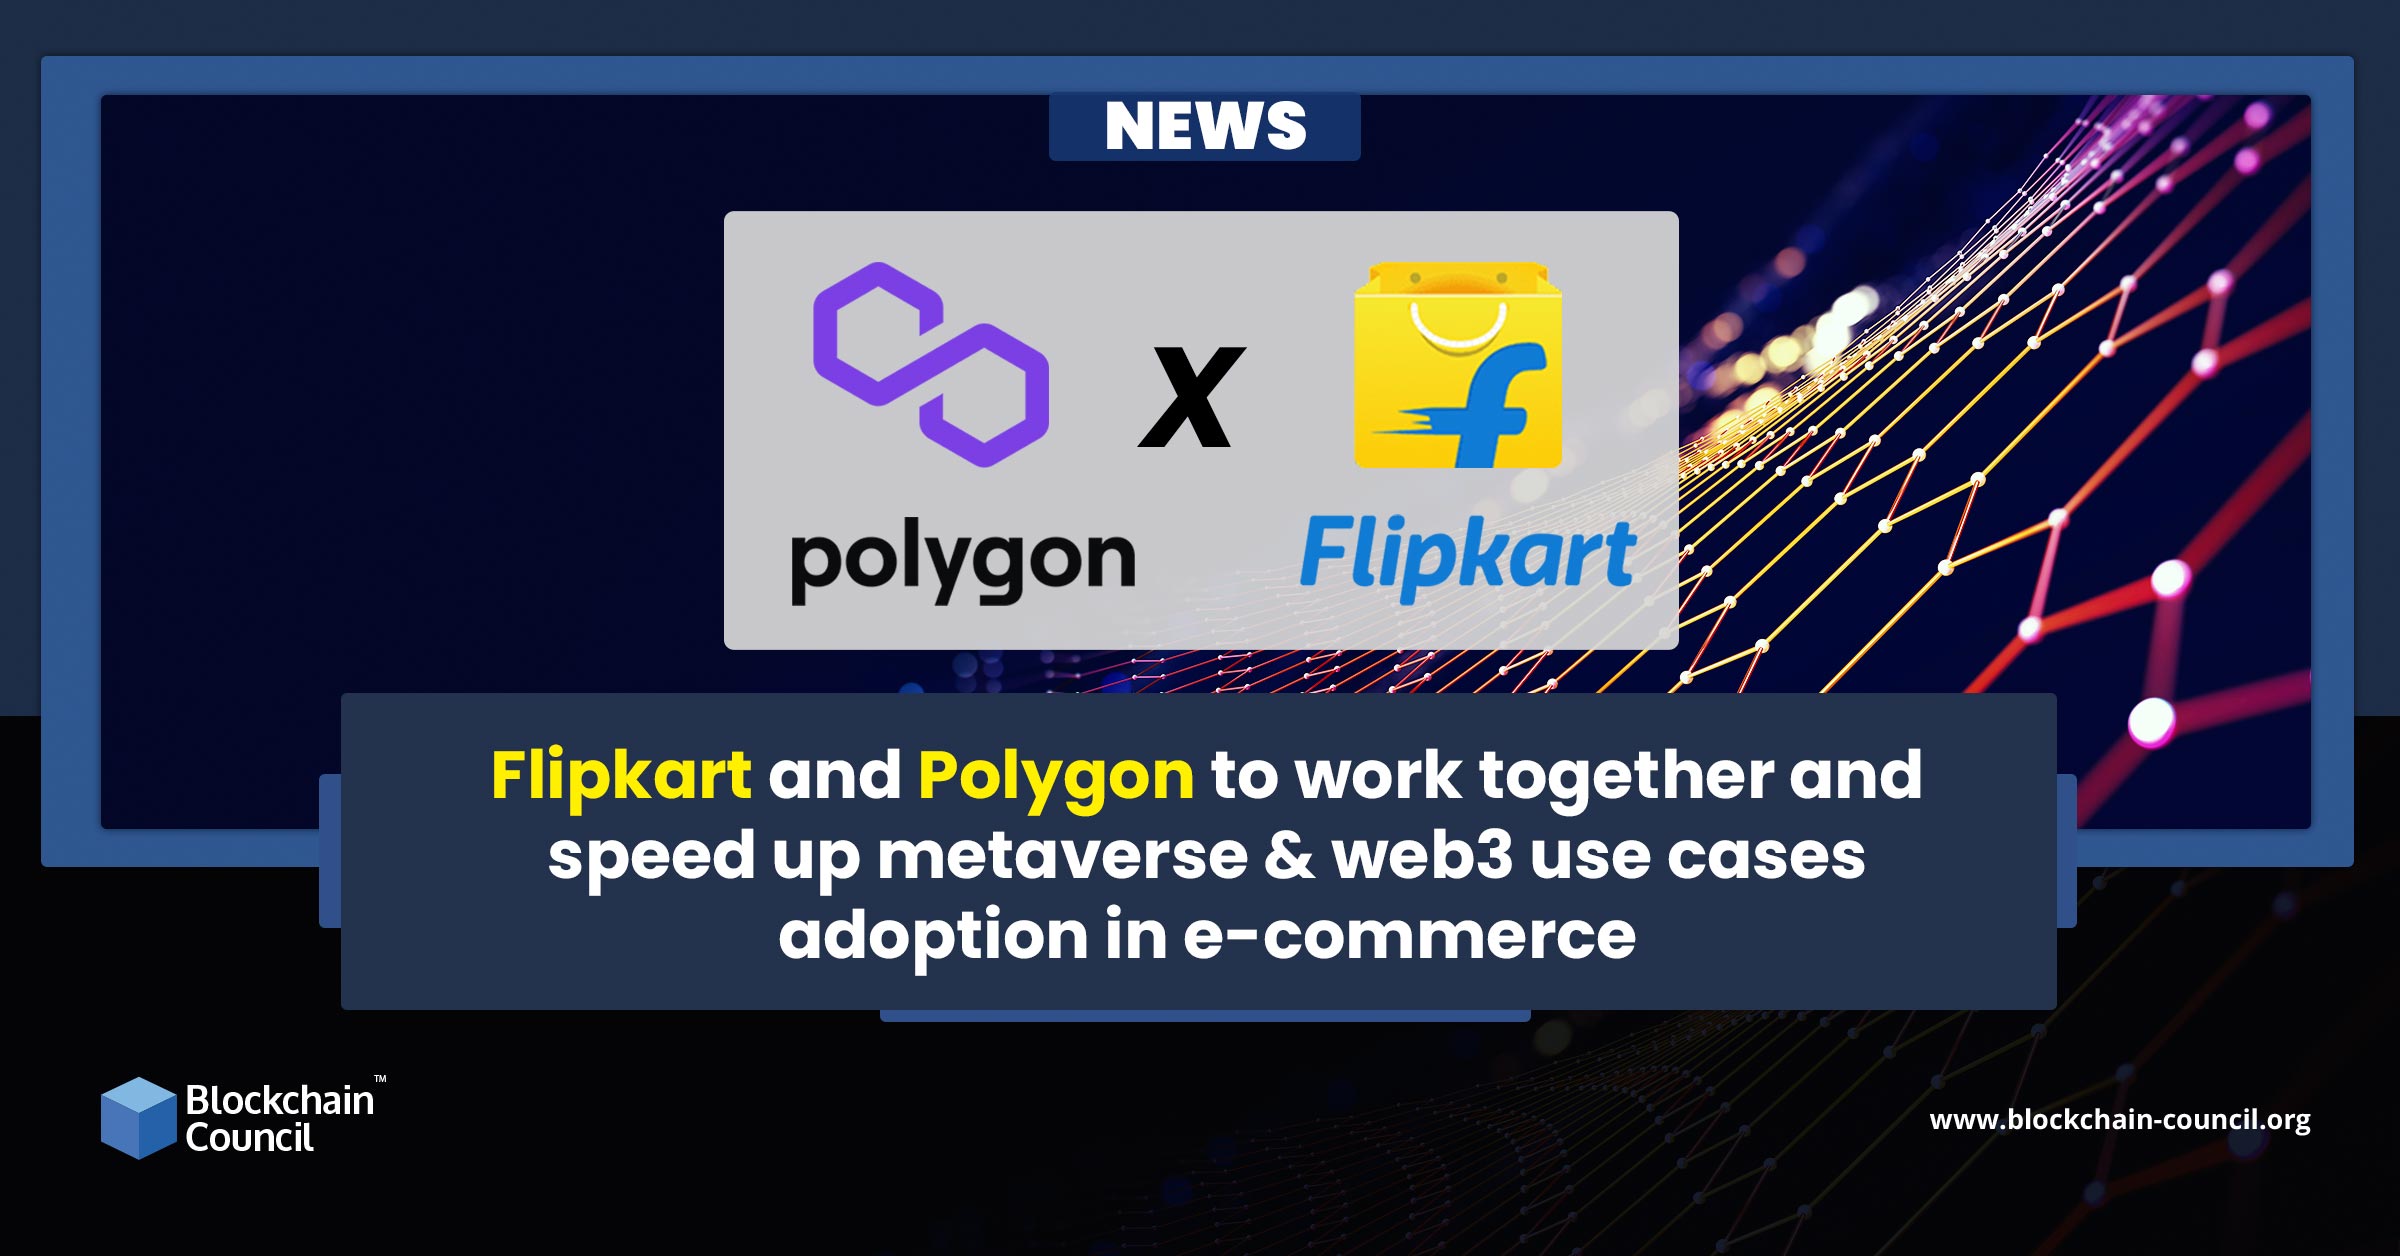 Flipkart and Polygon to work together and speed up metaverse & web3 use cases adoption in e-commerce